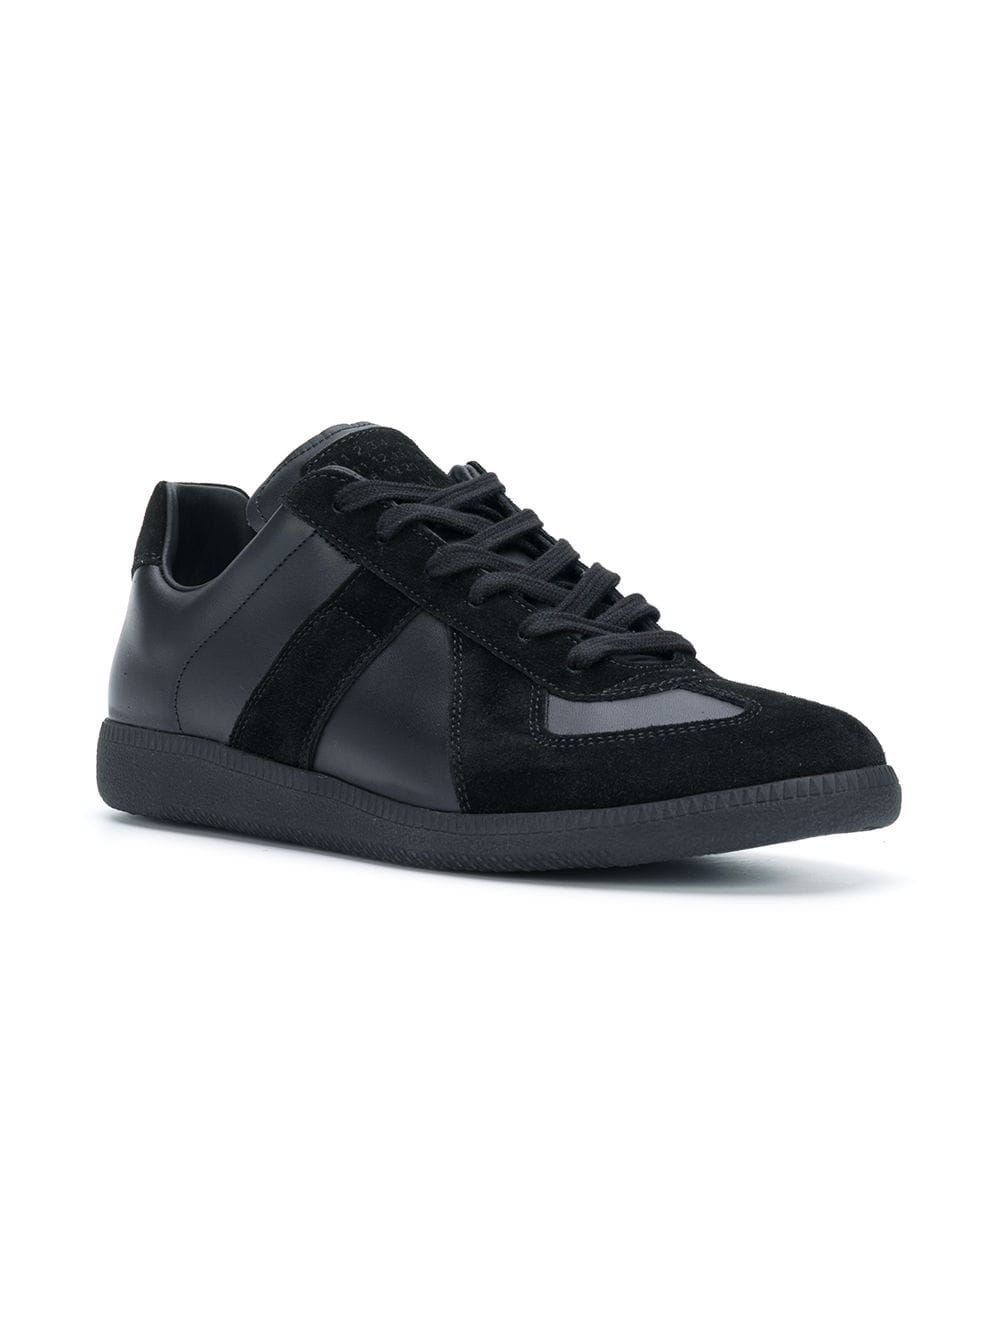 Stylish All-Black Shoes for Men